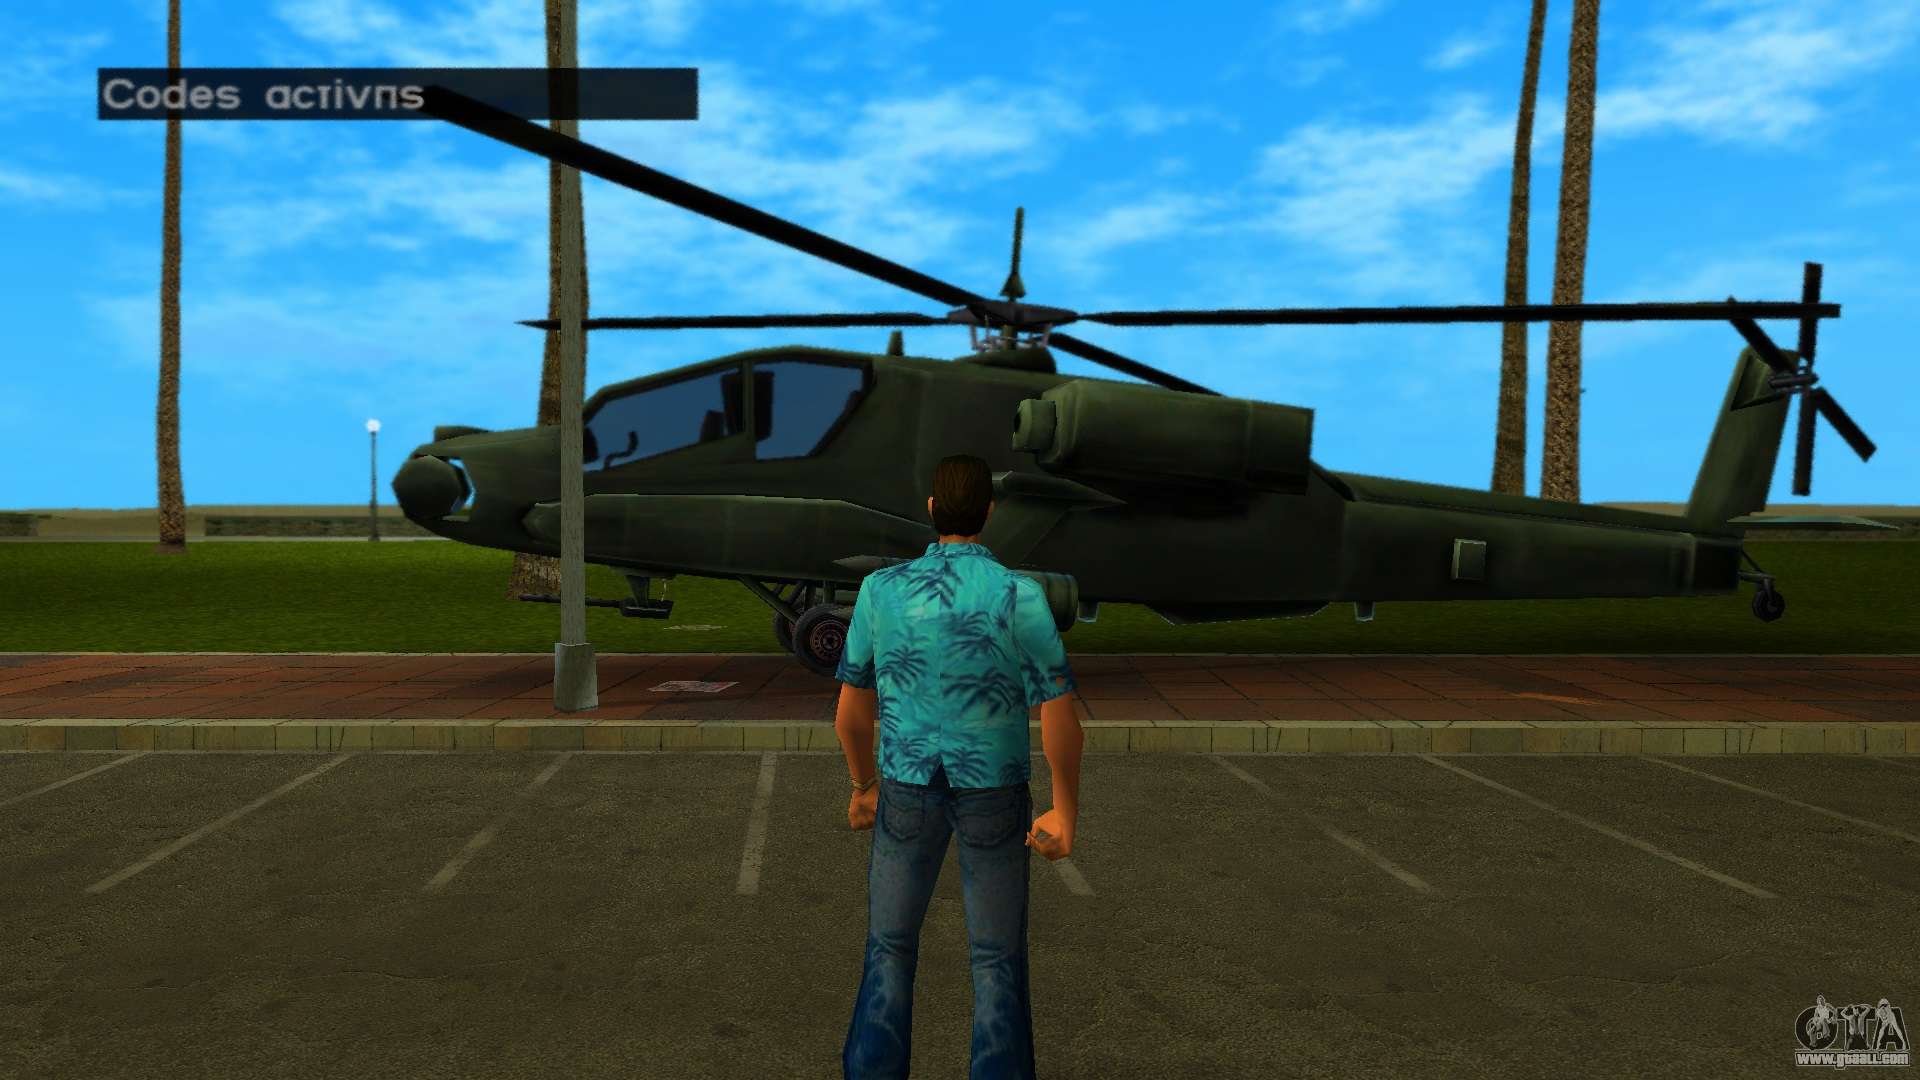 GTA V: List of every cheat, including Helicopter Cheat